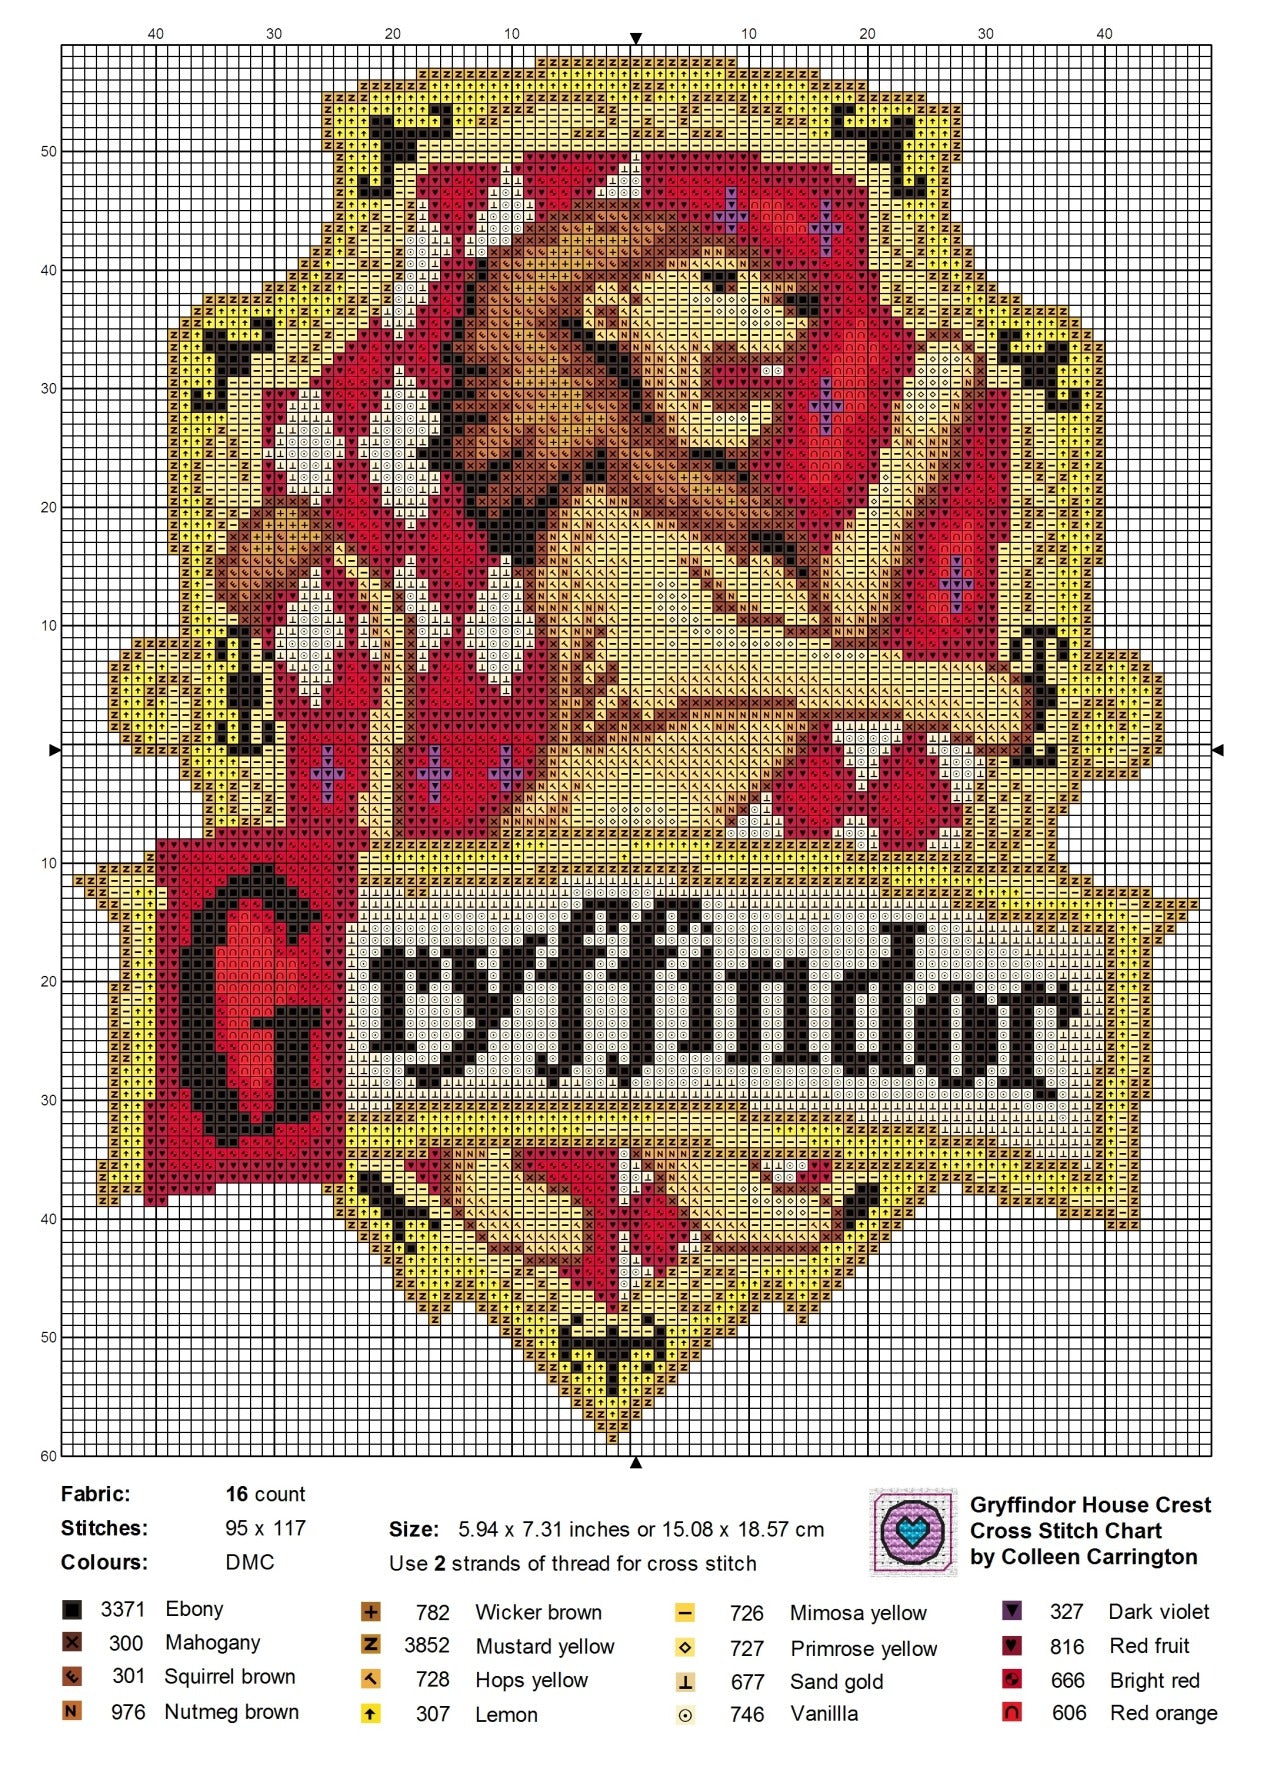 FO] Finished a Harry Potter cross stitch. I got the pattern from